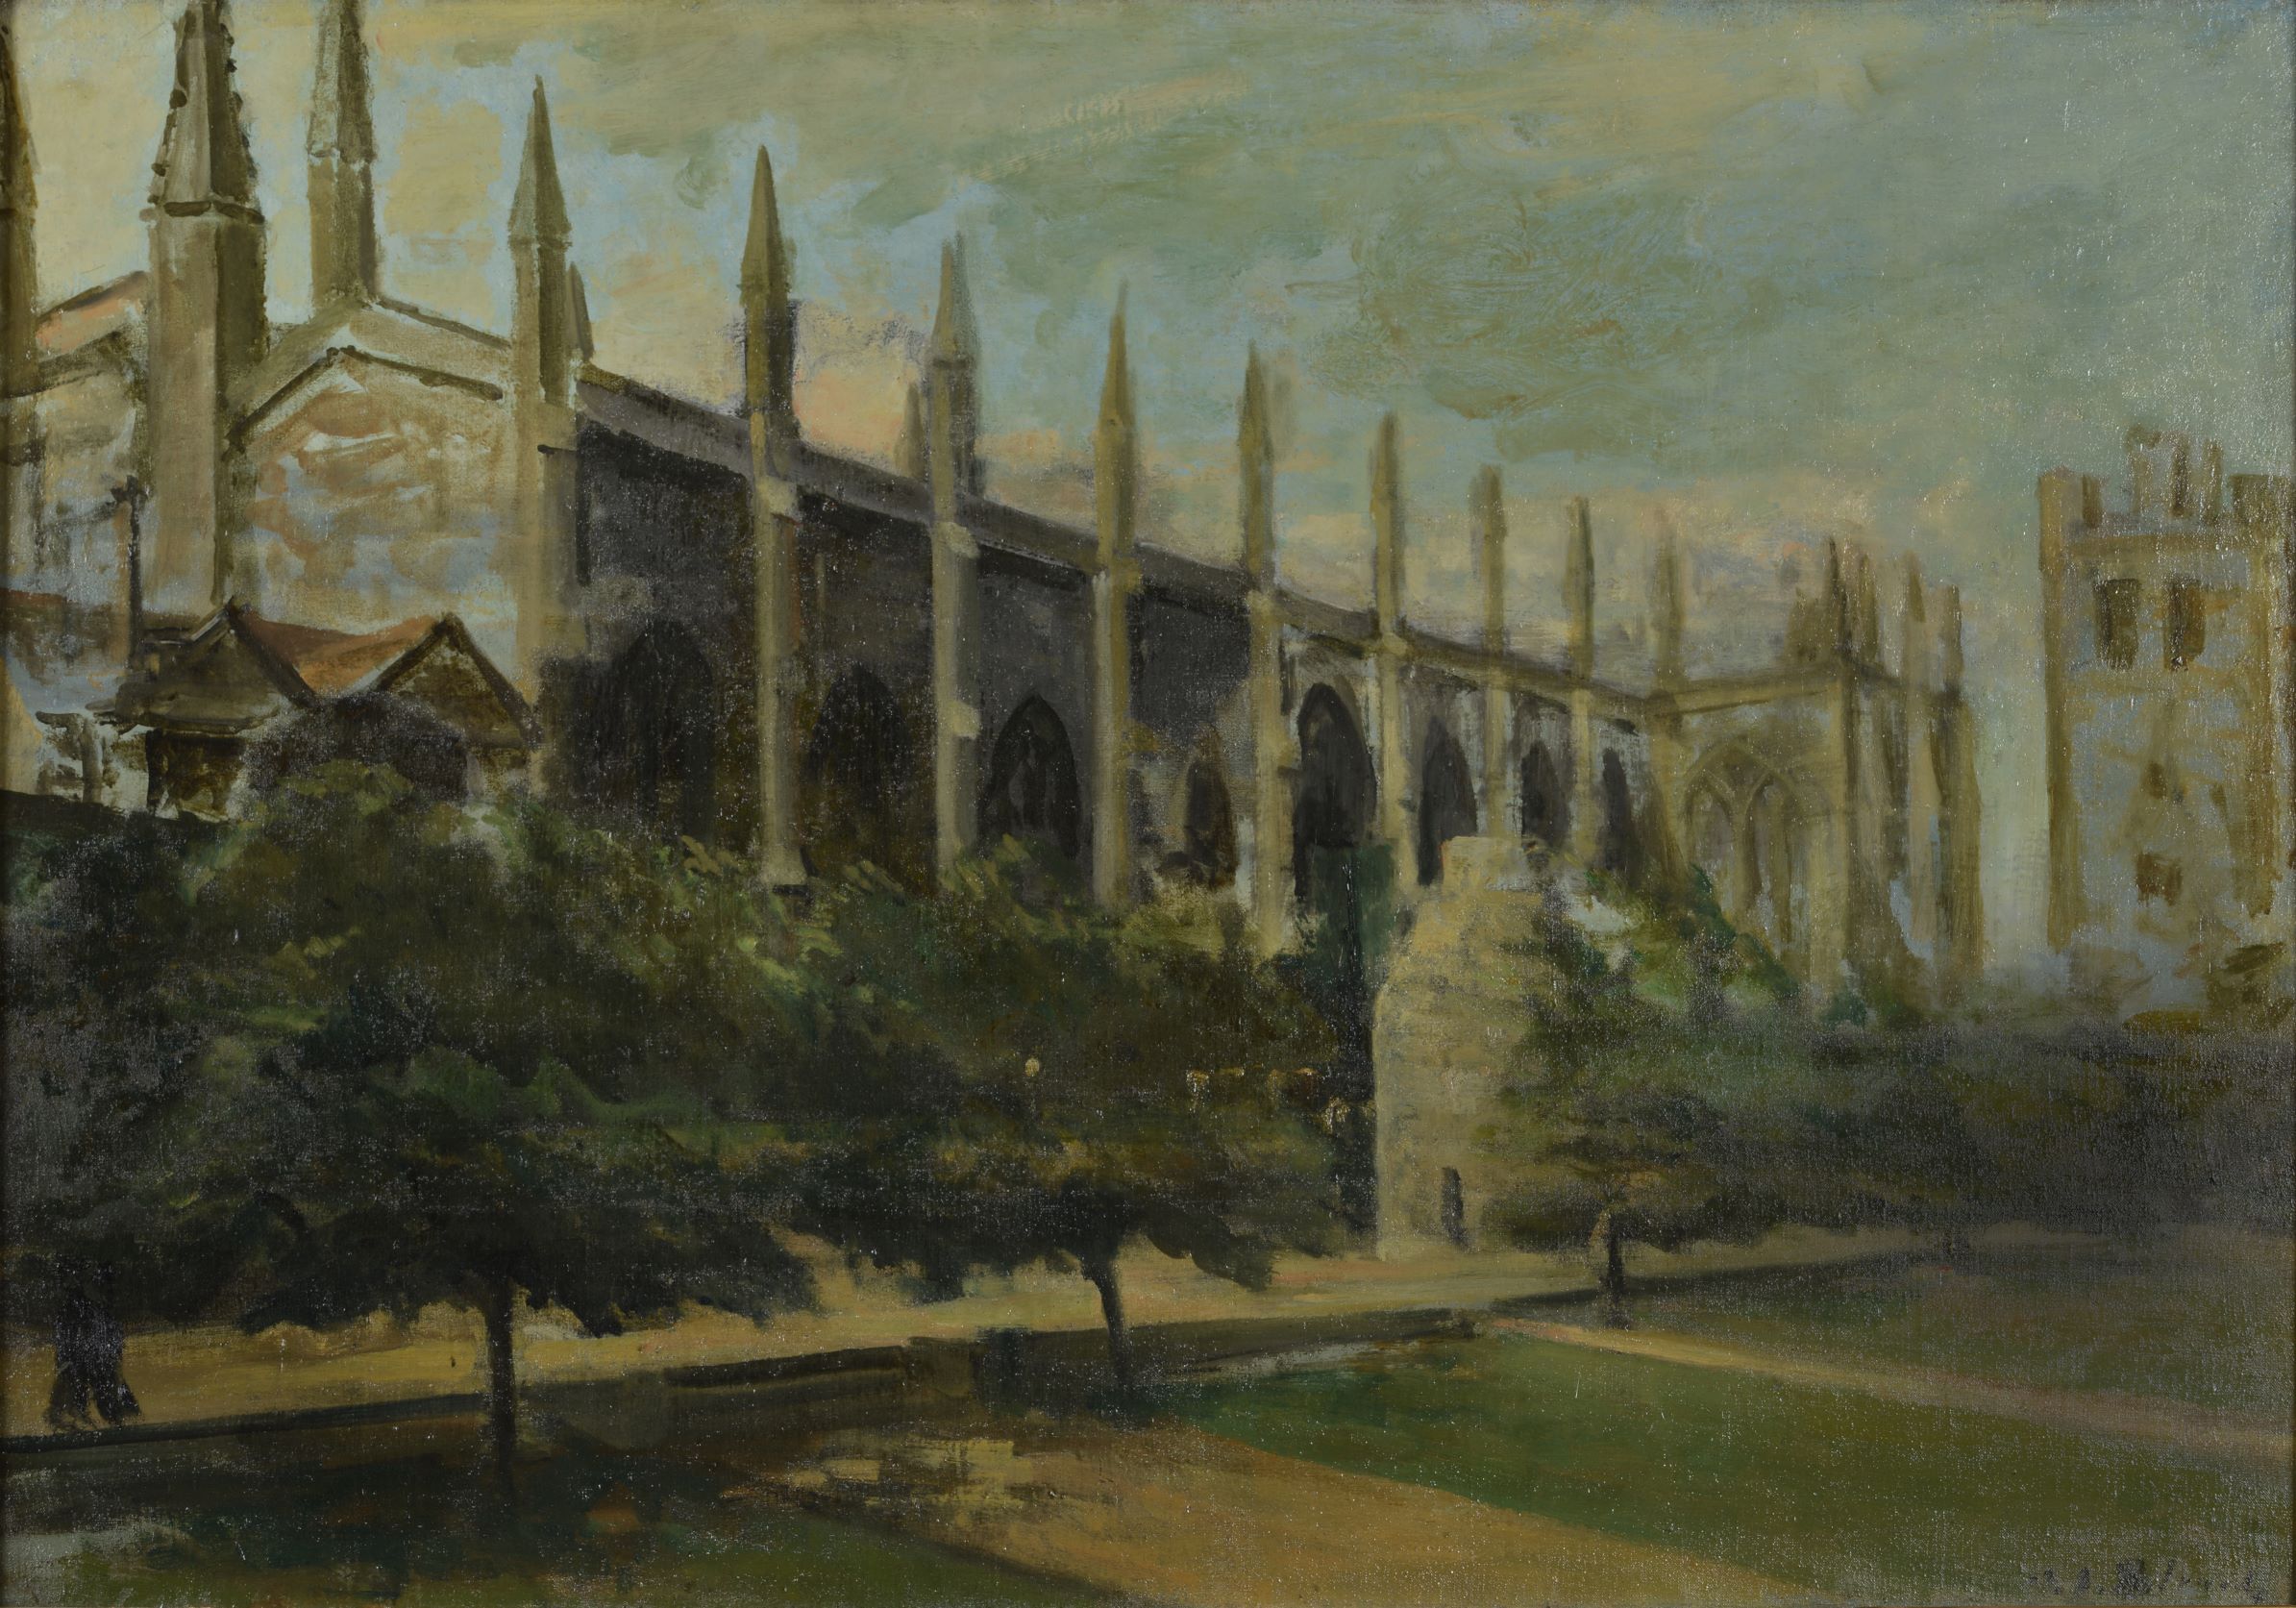 New College, Oxford; artist: Jacques-Émile Blanche; medium: Oil on Canvas; date: 19th - 20th century.